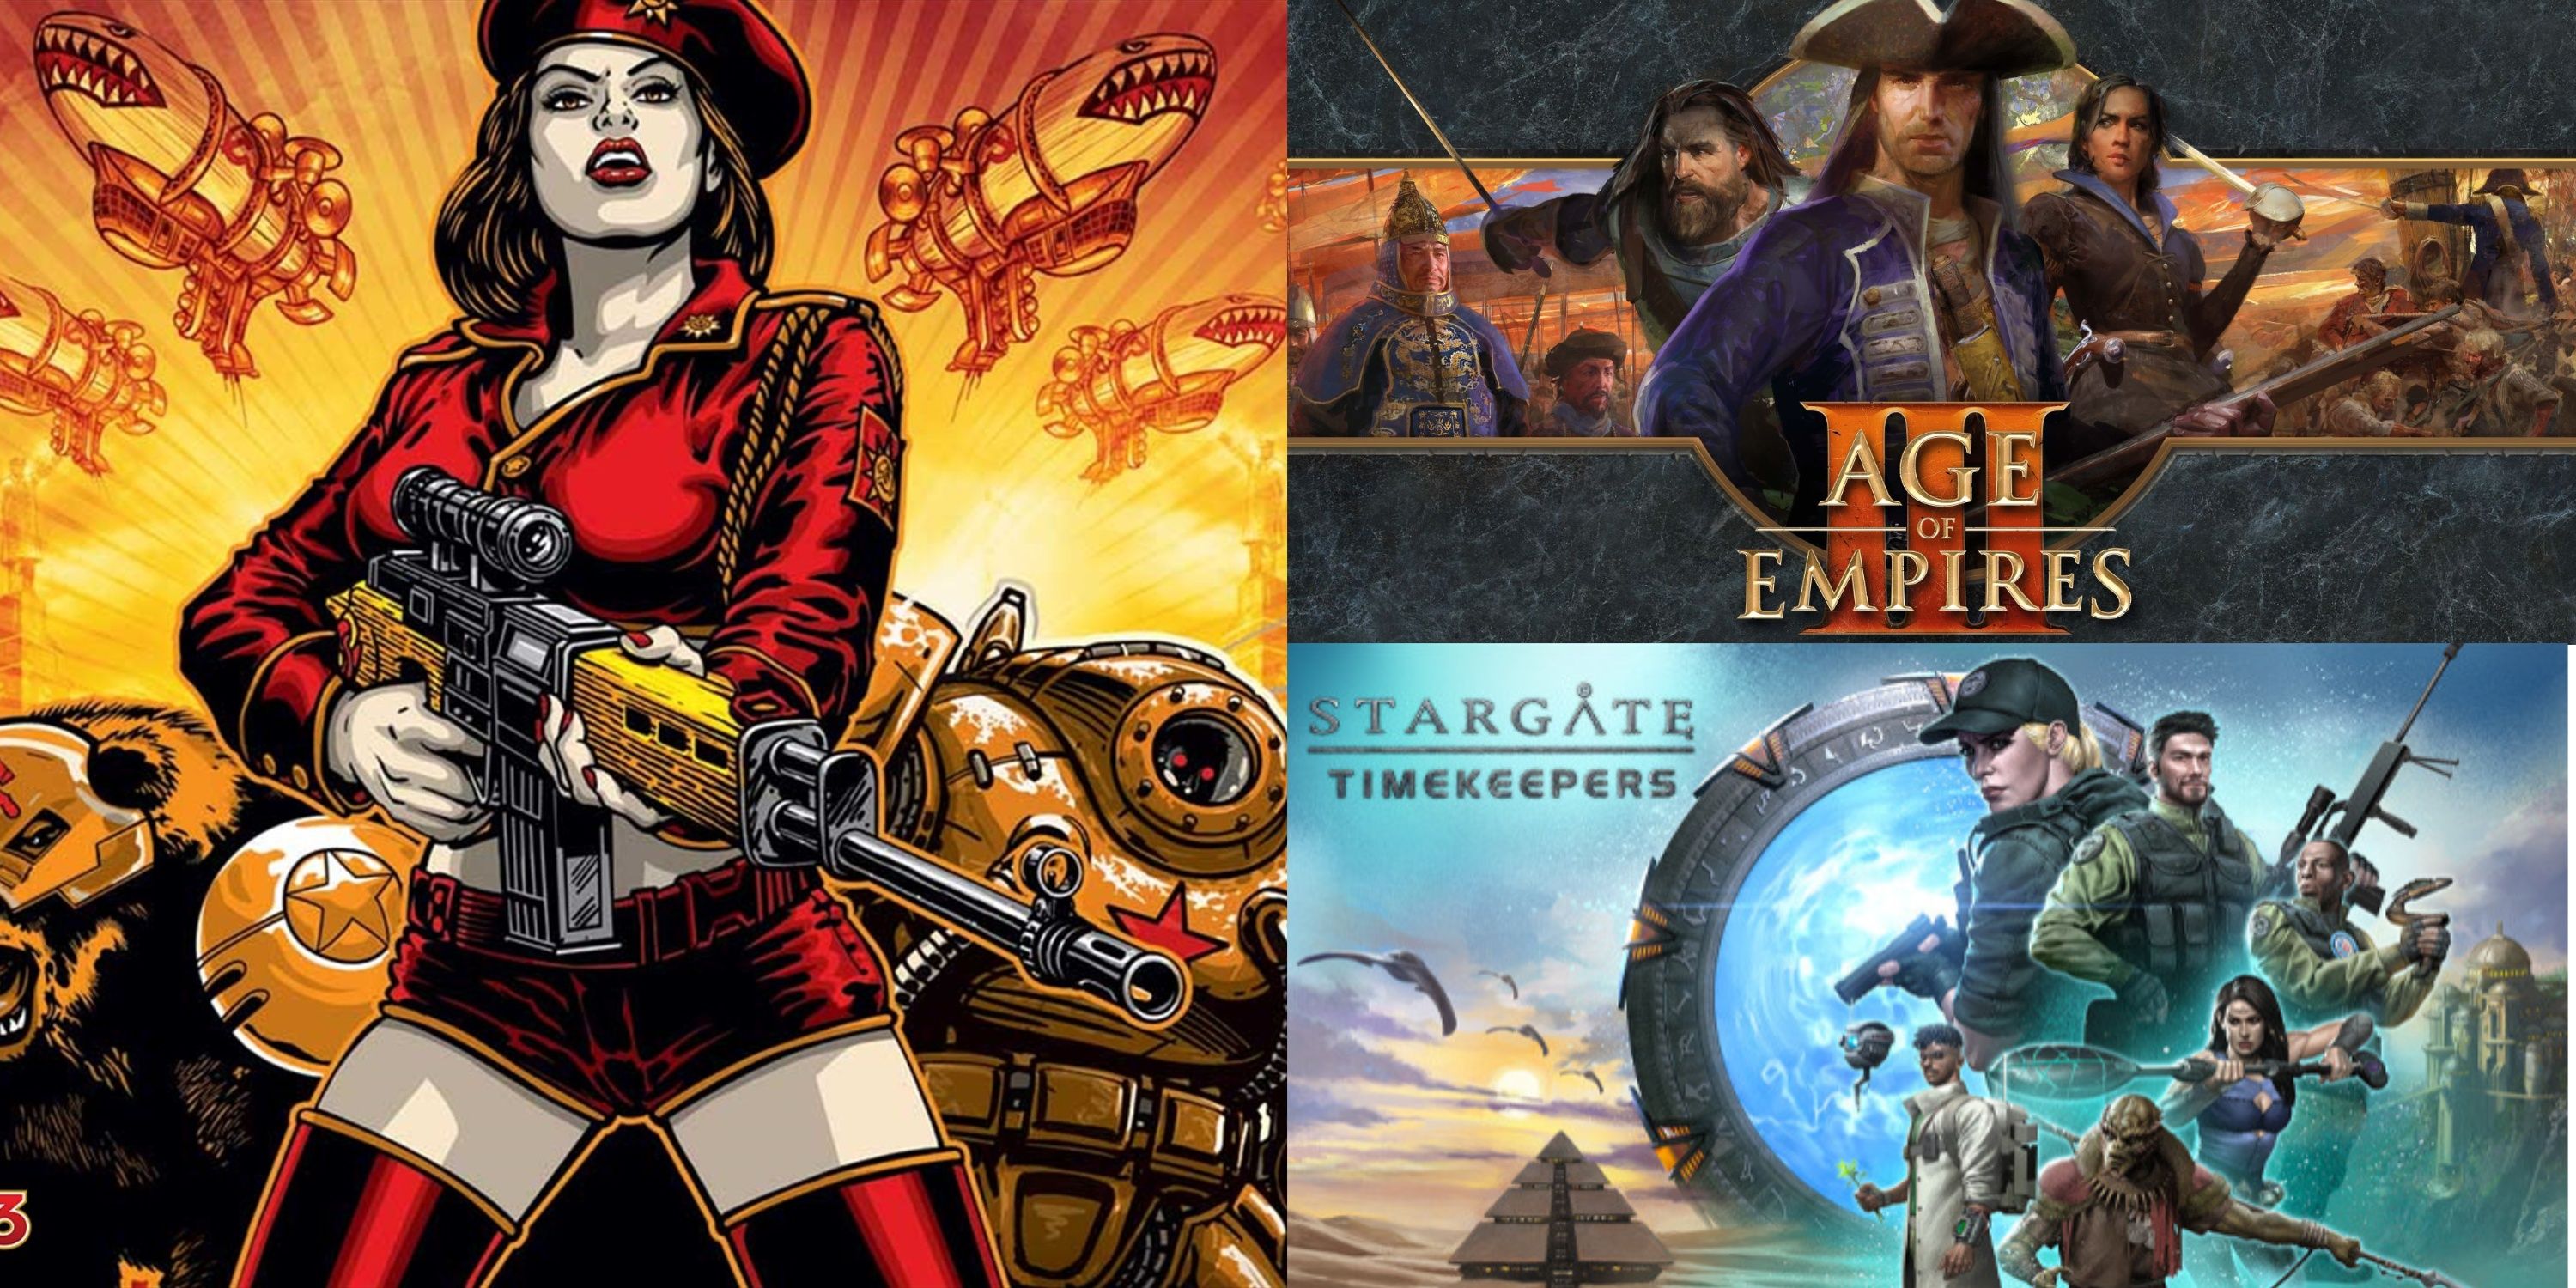 Command and conquer 3, Stargate Timekeepers, and Age of Empires 3